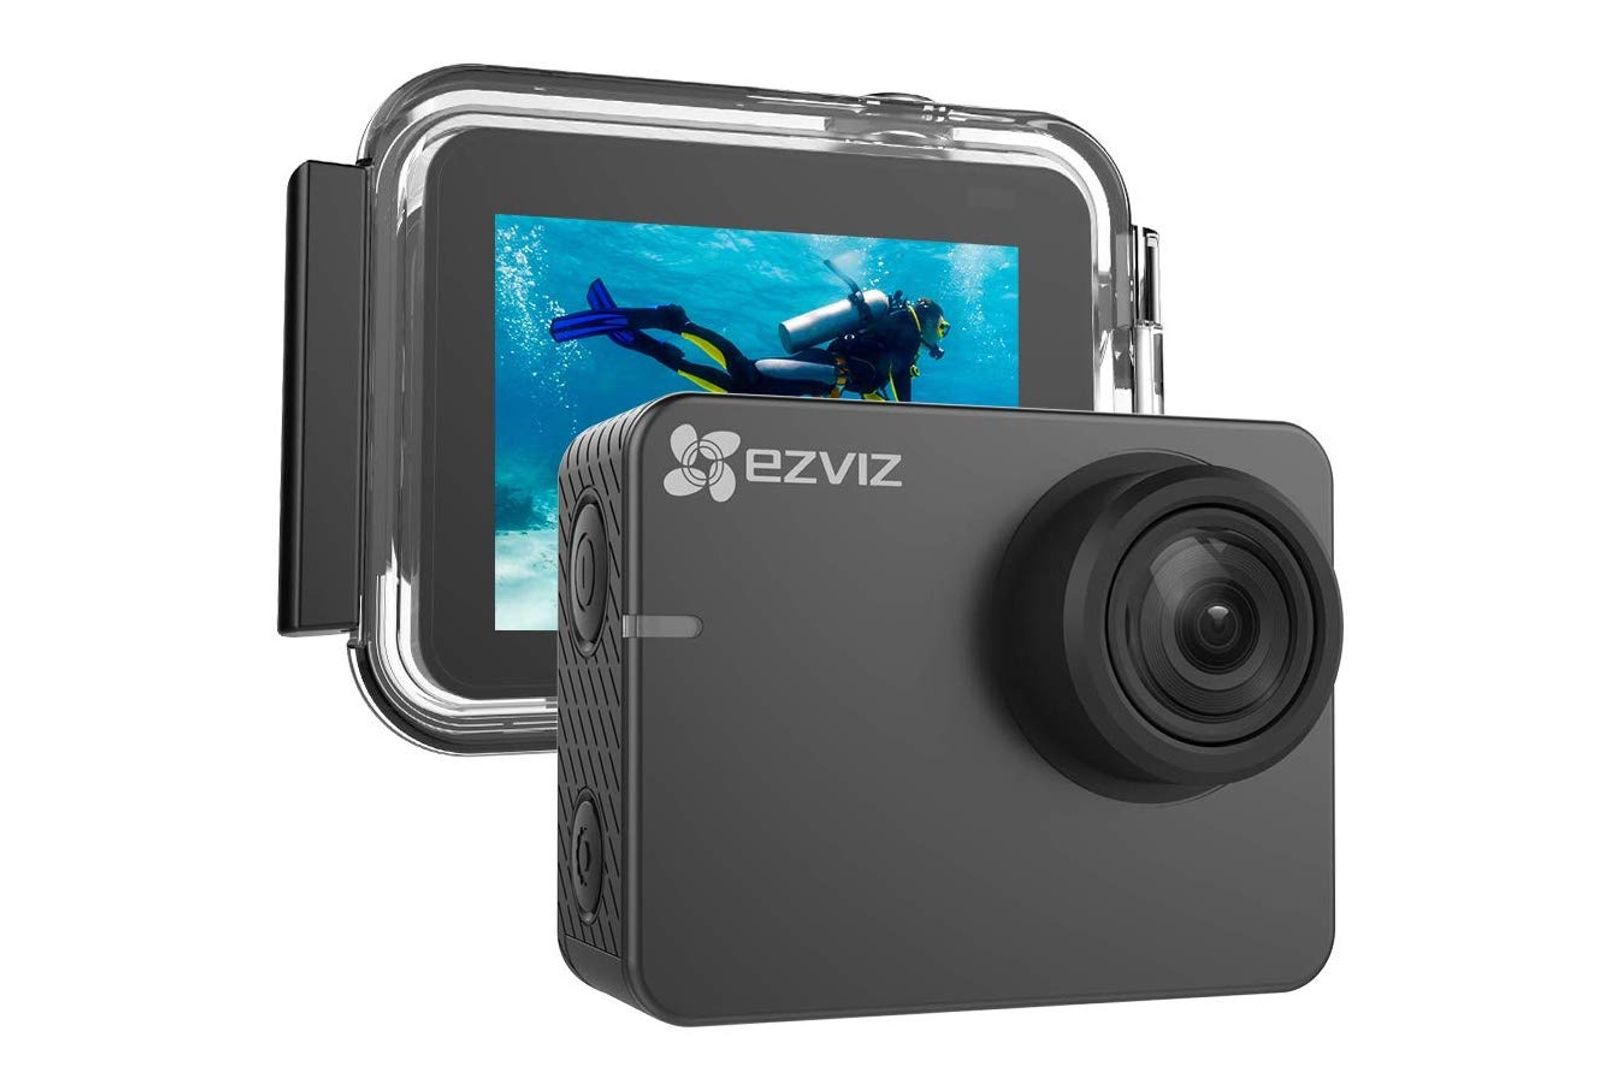 The Best Deals On Home Security Cameras From Ezviz image 6